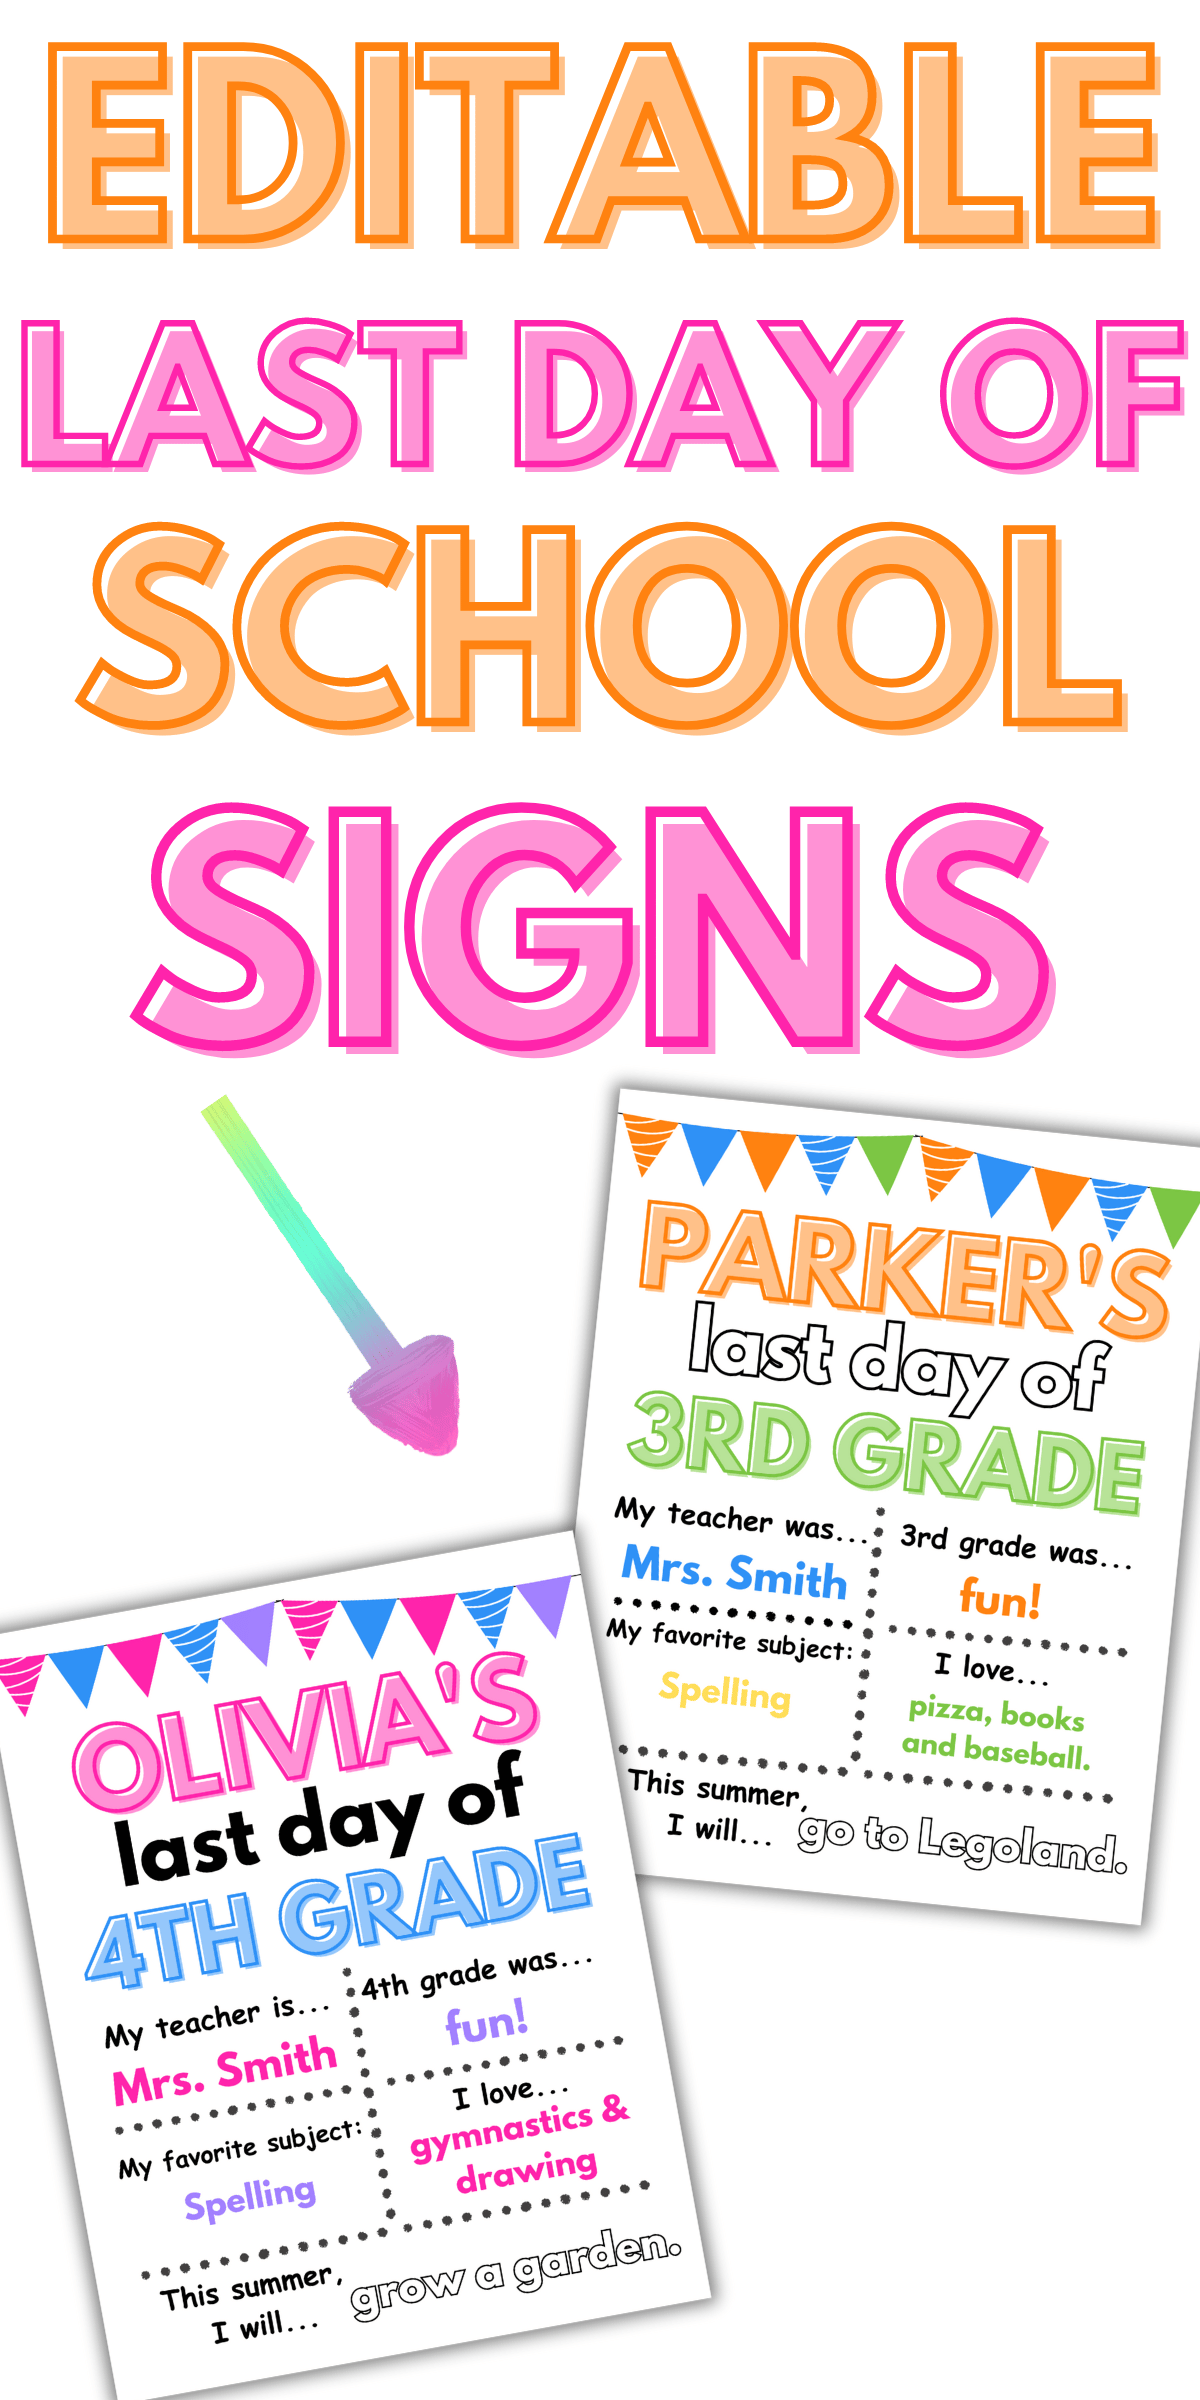 Editable signs with child's name, teacher's name, grade, the best part of the school year, what they want to be when they grow up and what they like to do.